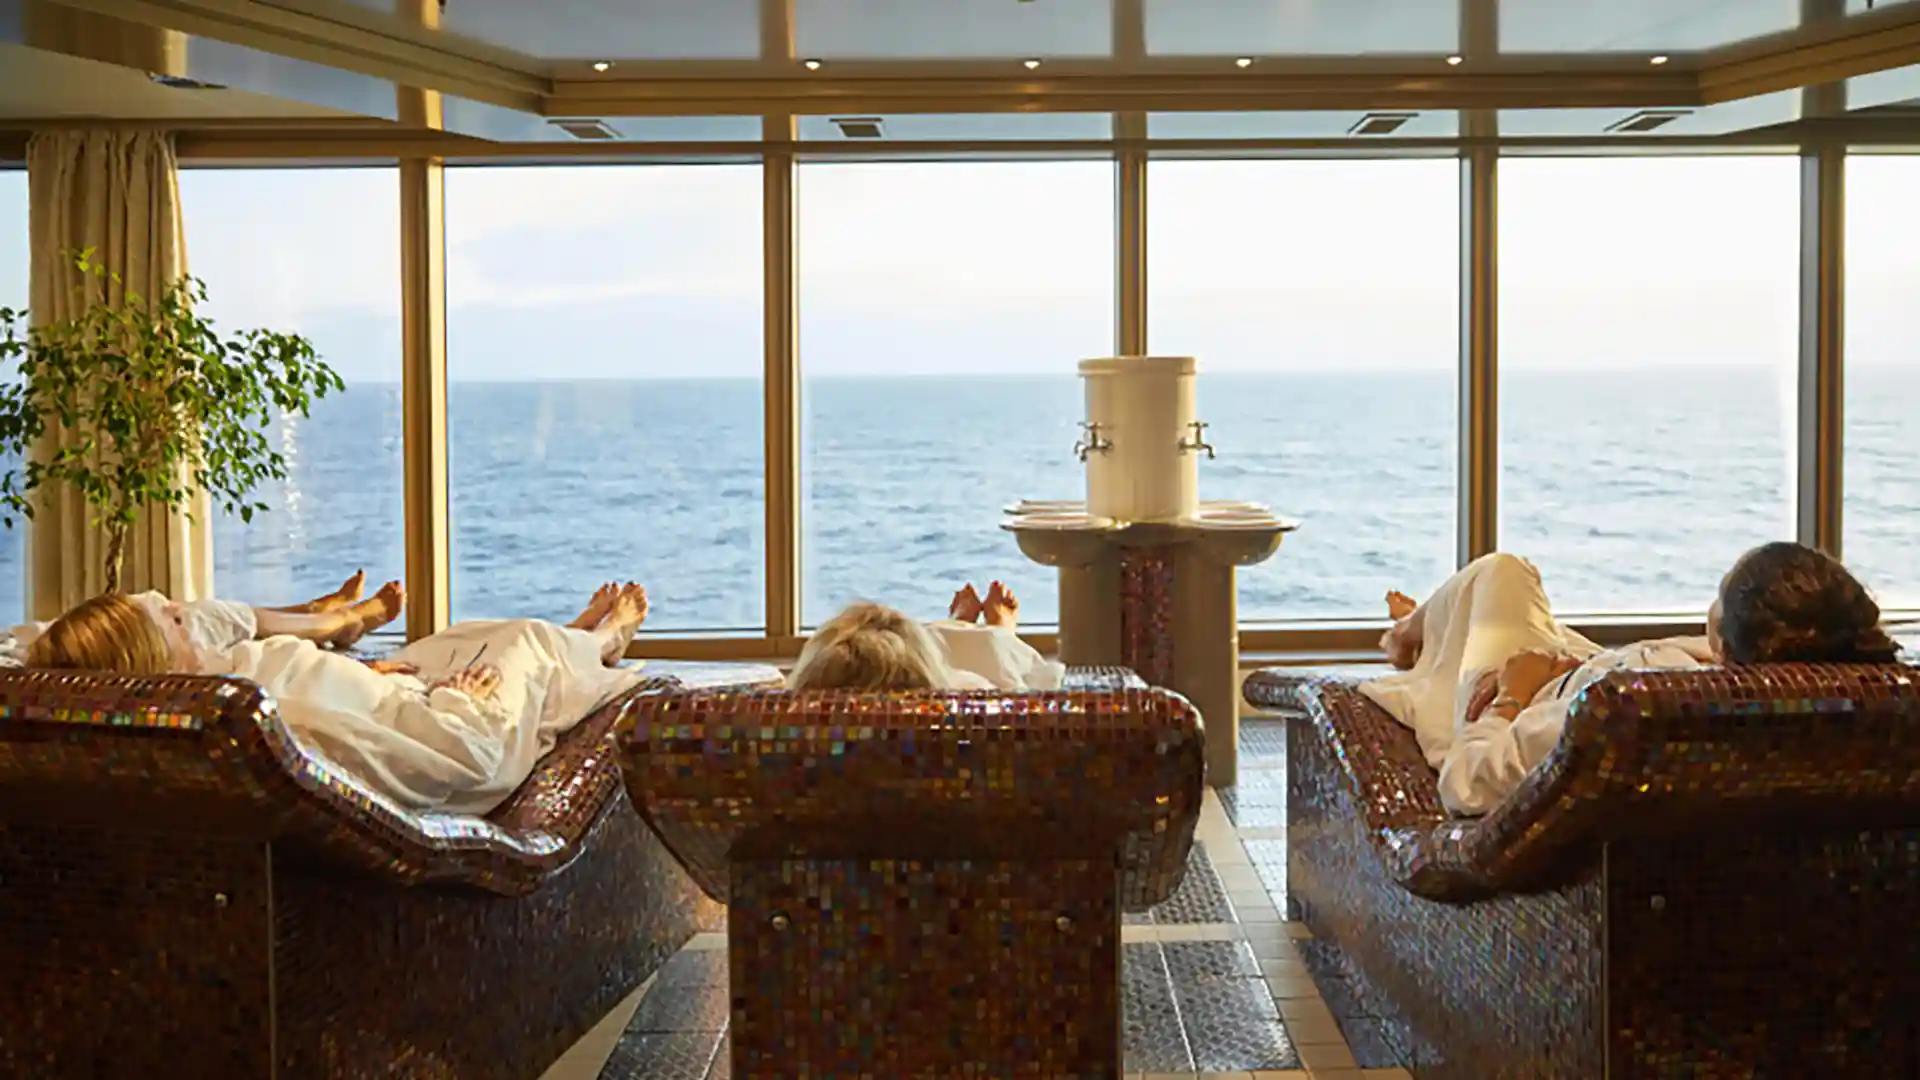 View of people relaxing on loungers with ocean views on Holland America Line ship.